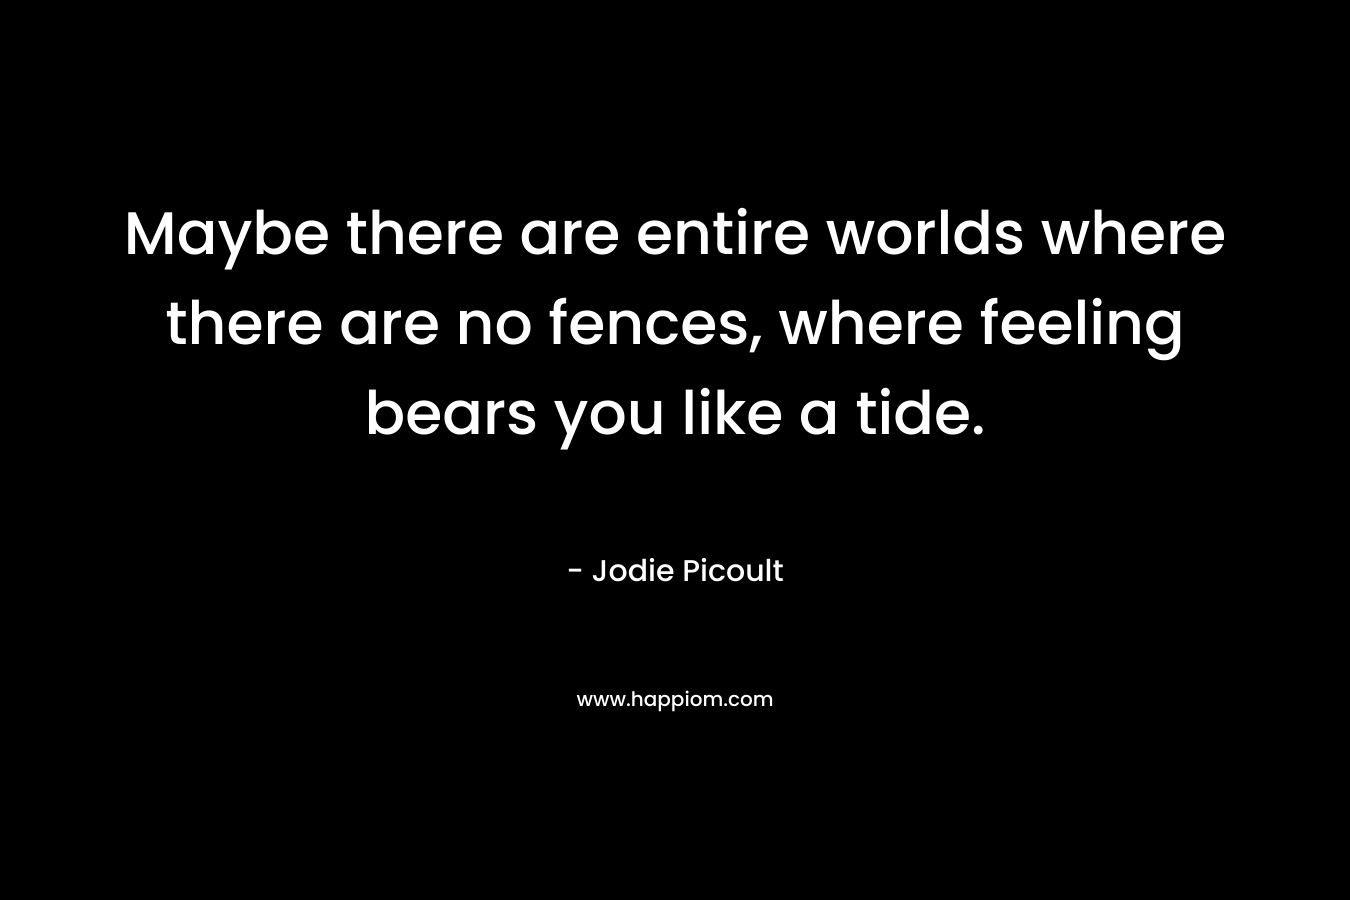 Maybe there are entire worlds where there are no fences, where feeling bears you like a tide. – Jodie Picoult